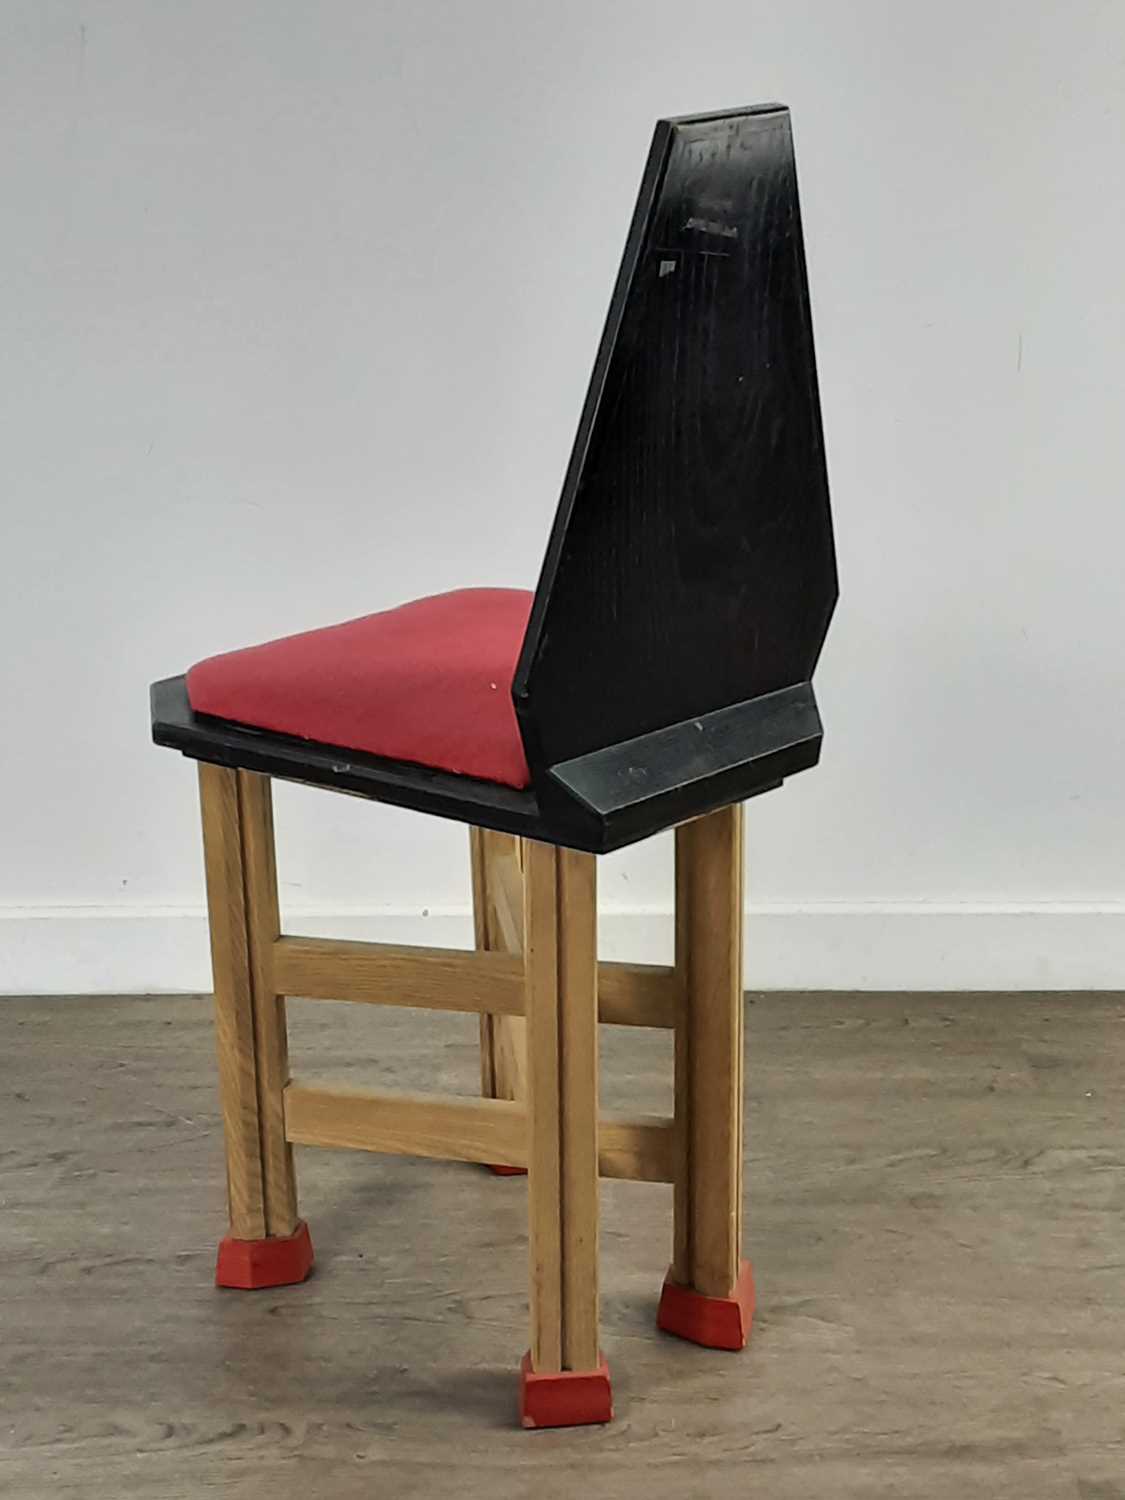 THE OIL RIG DESK CHAIR BY STEPHEN OWEN - Image 2 of 2